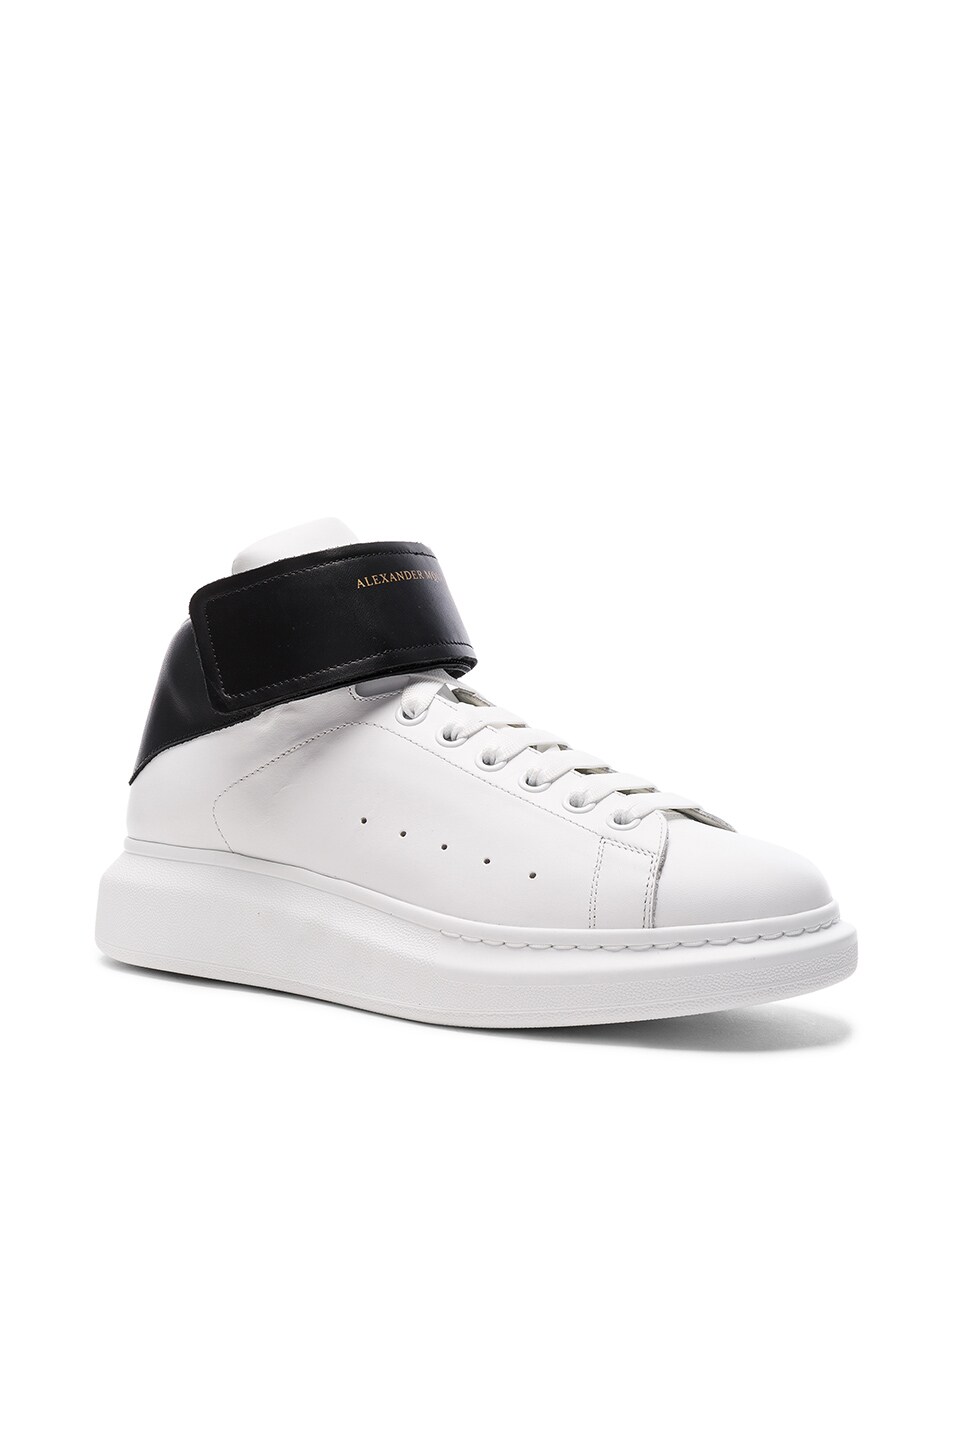 Image 1 of Alexander McQueen Strap Platform High Top Leather Sneakers in Black & White